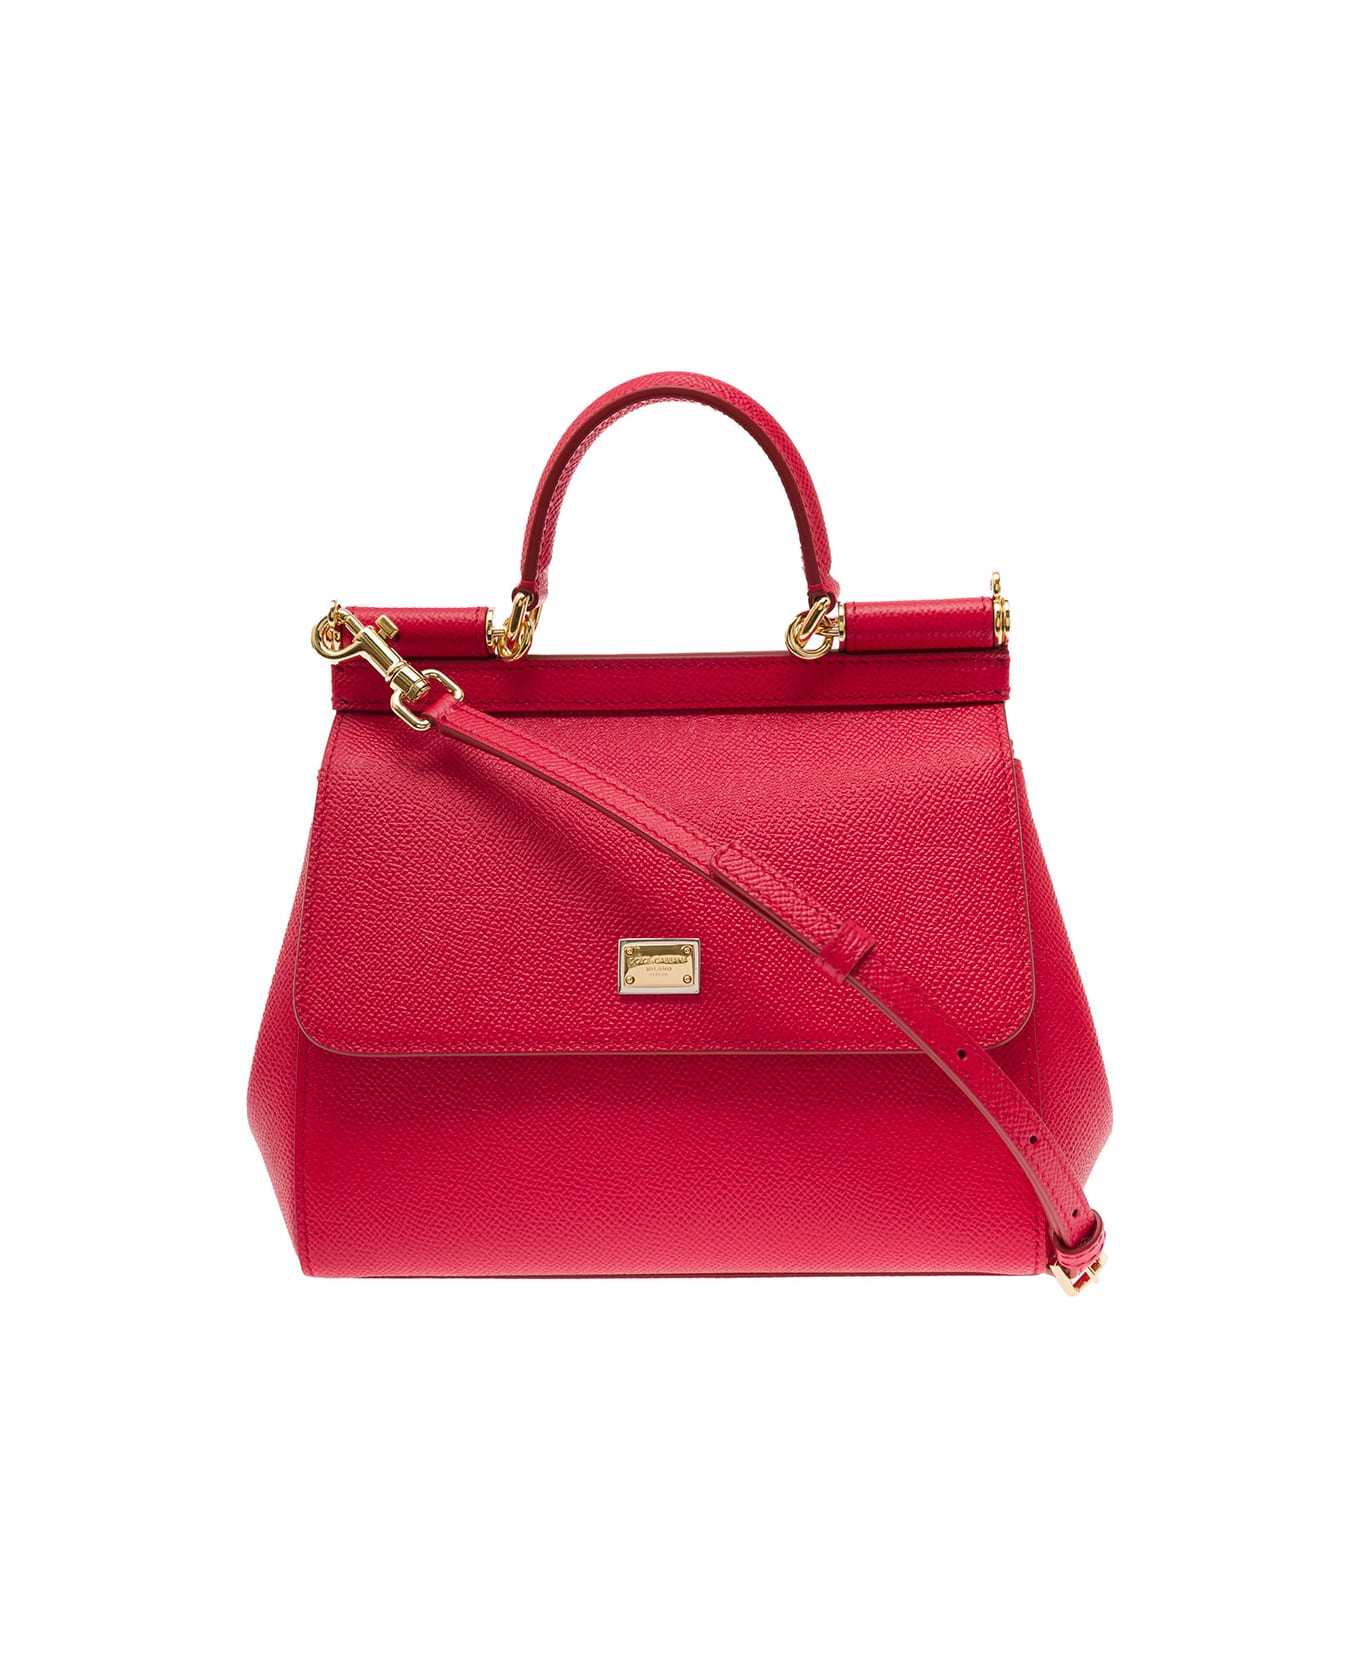 Dolce & Gabbana Sicily Dauphine Handbag In Red Leather Woman - Red